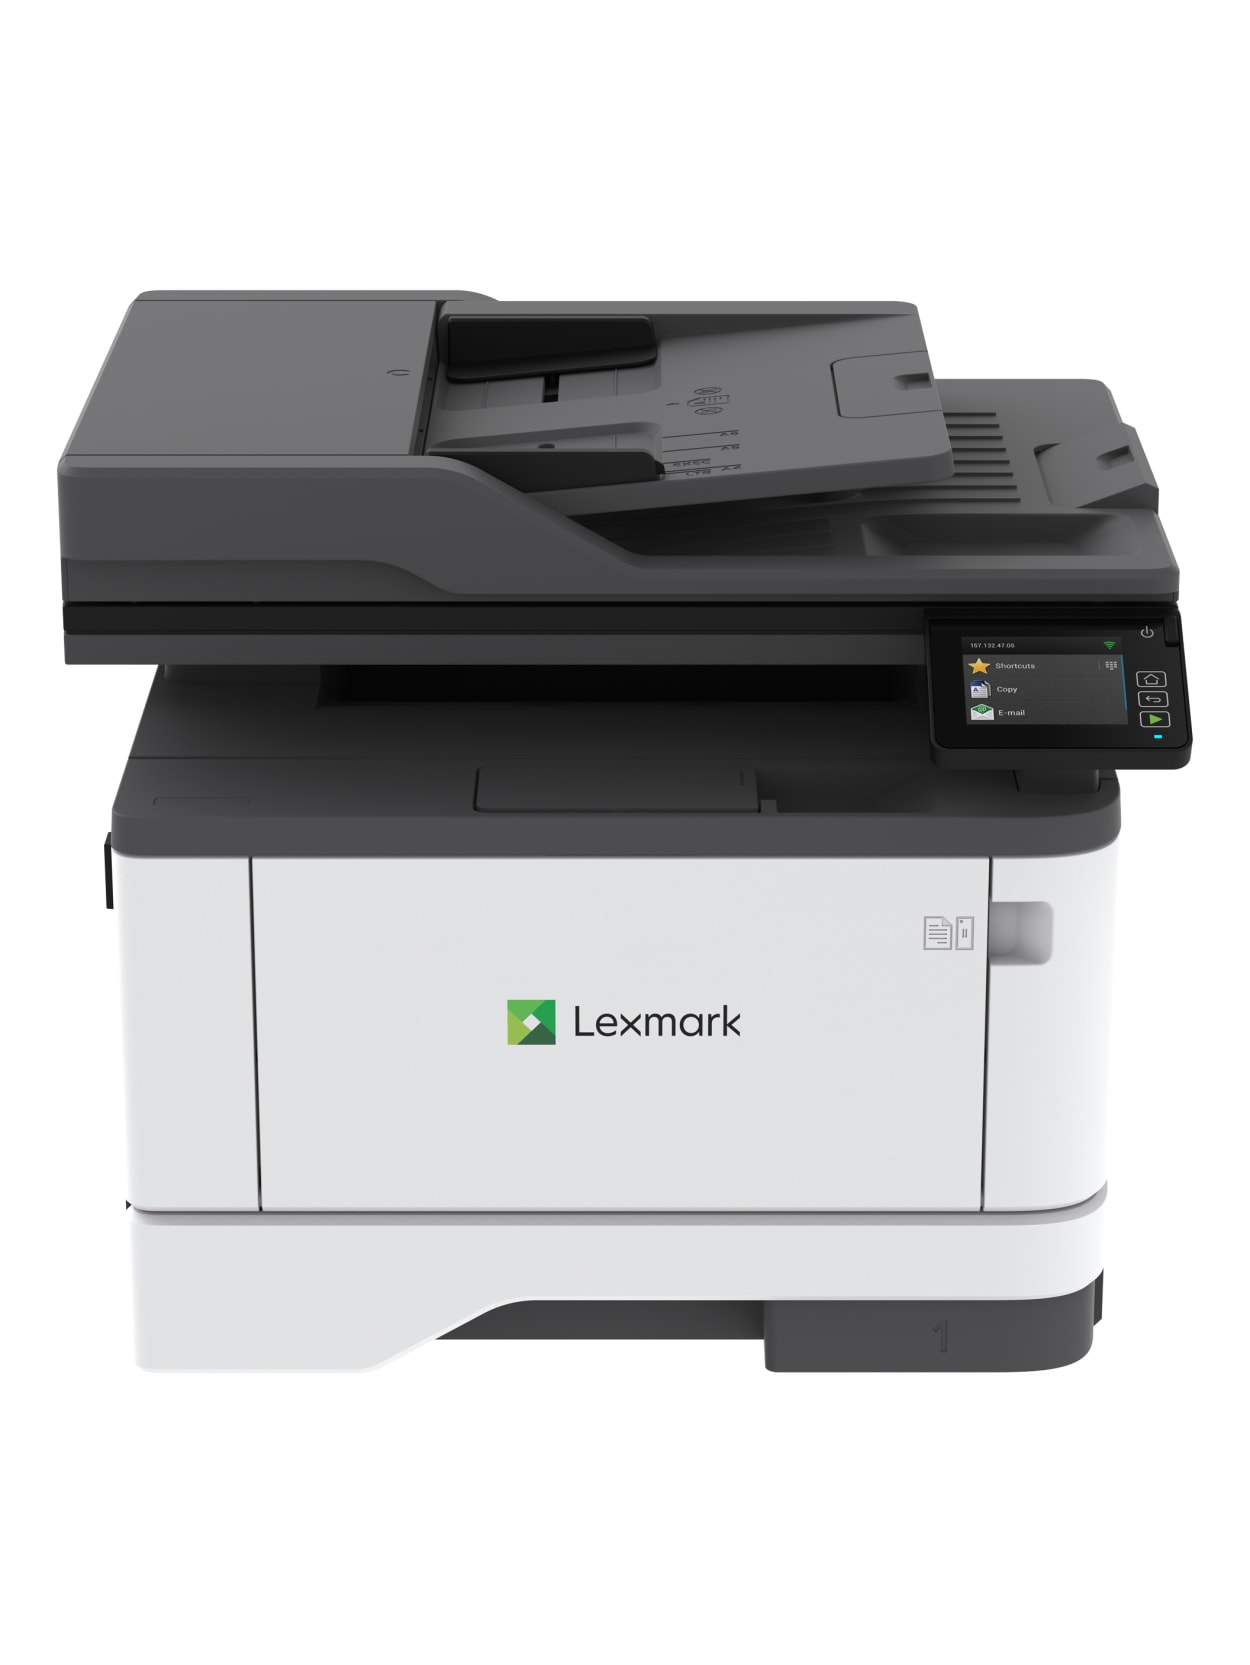 Lexmark Mb3442adw Mono All In One Printer Office Depot